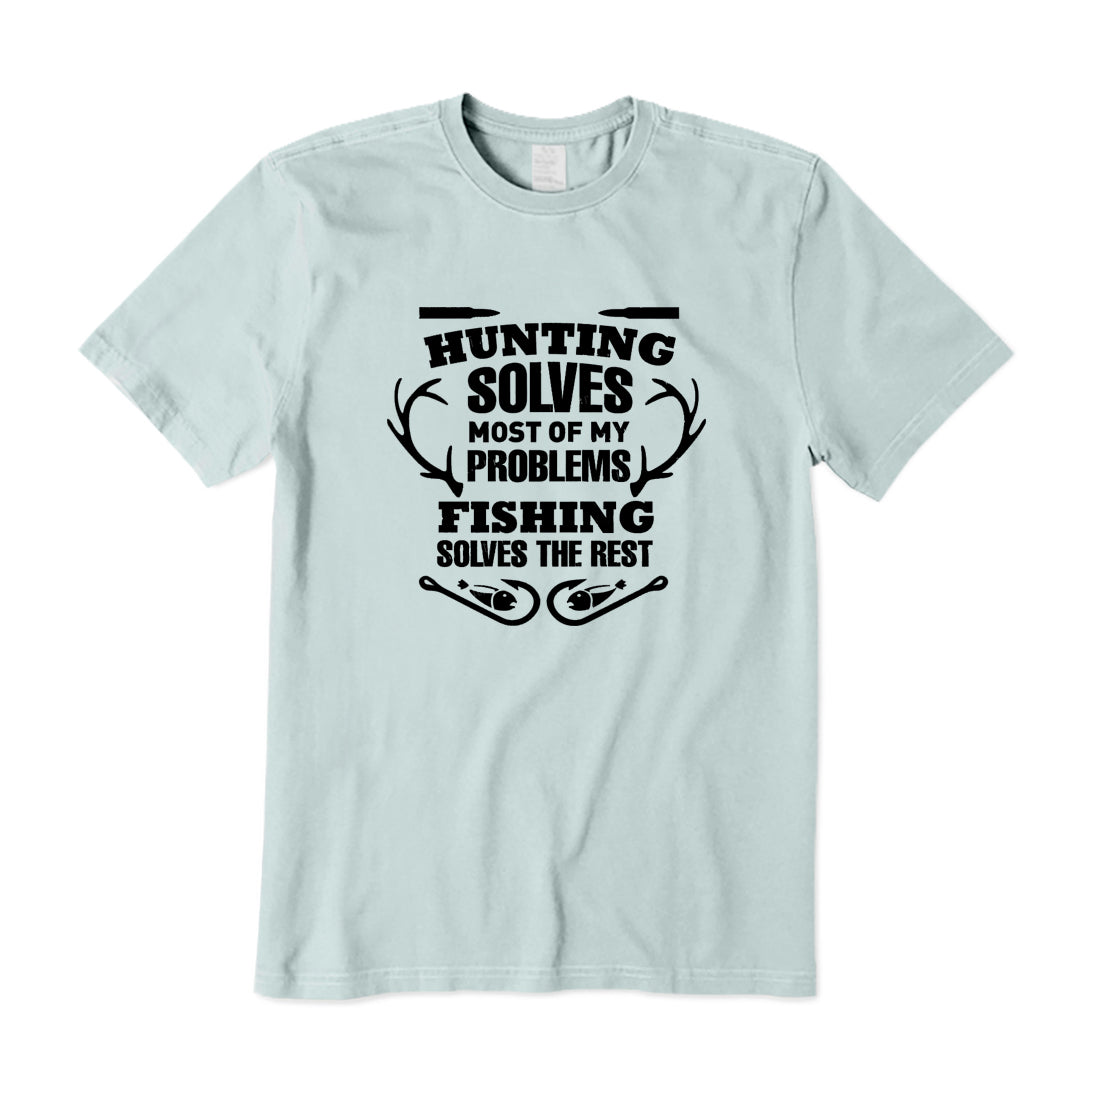 Hunting Solves Most Of My Problems Fishing Solves The Rest T-Shirt